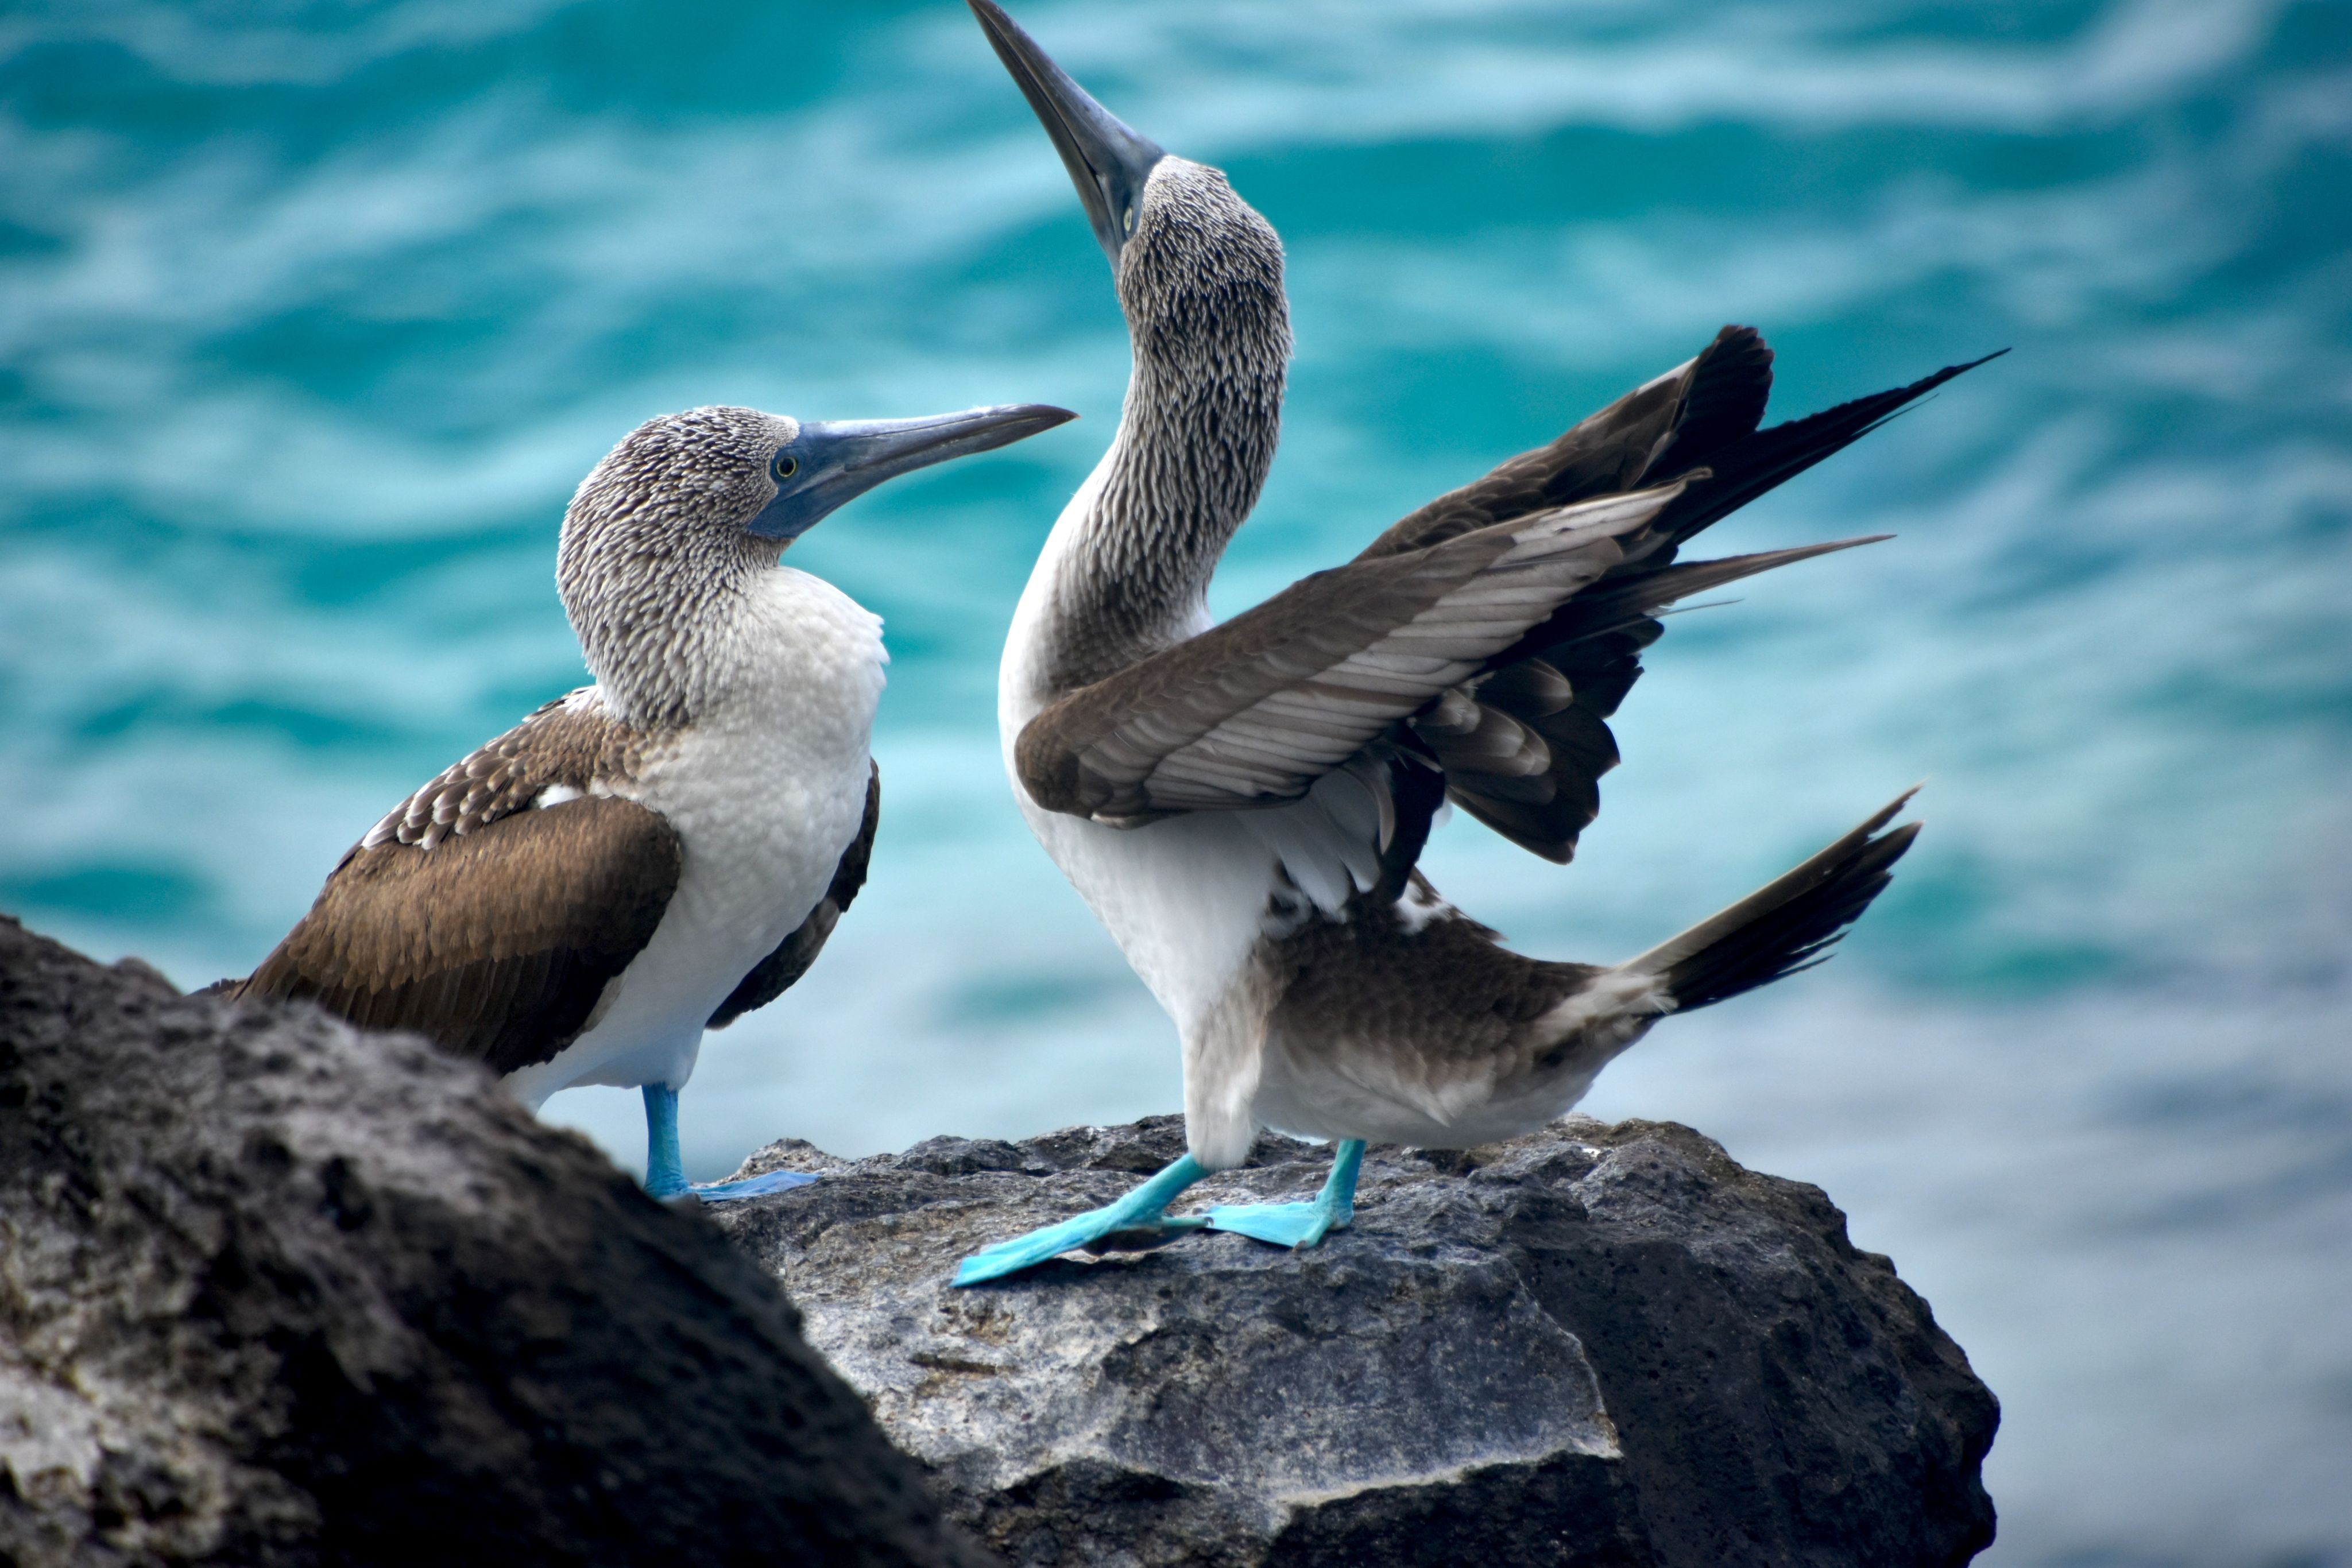 two birds, know as blue foot booby, standing on a rock